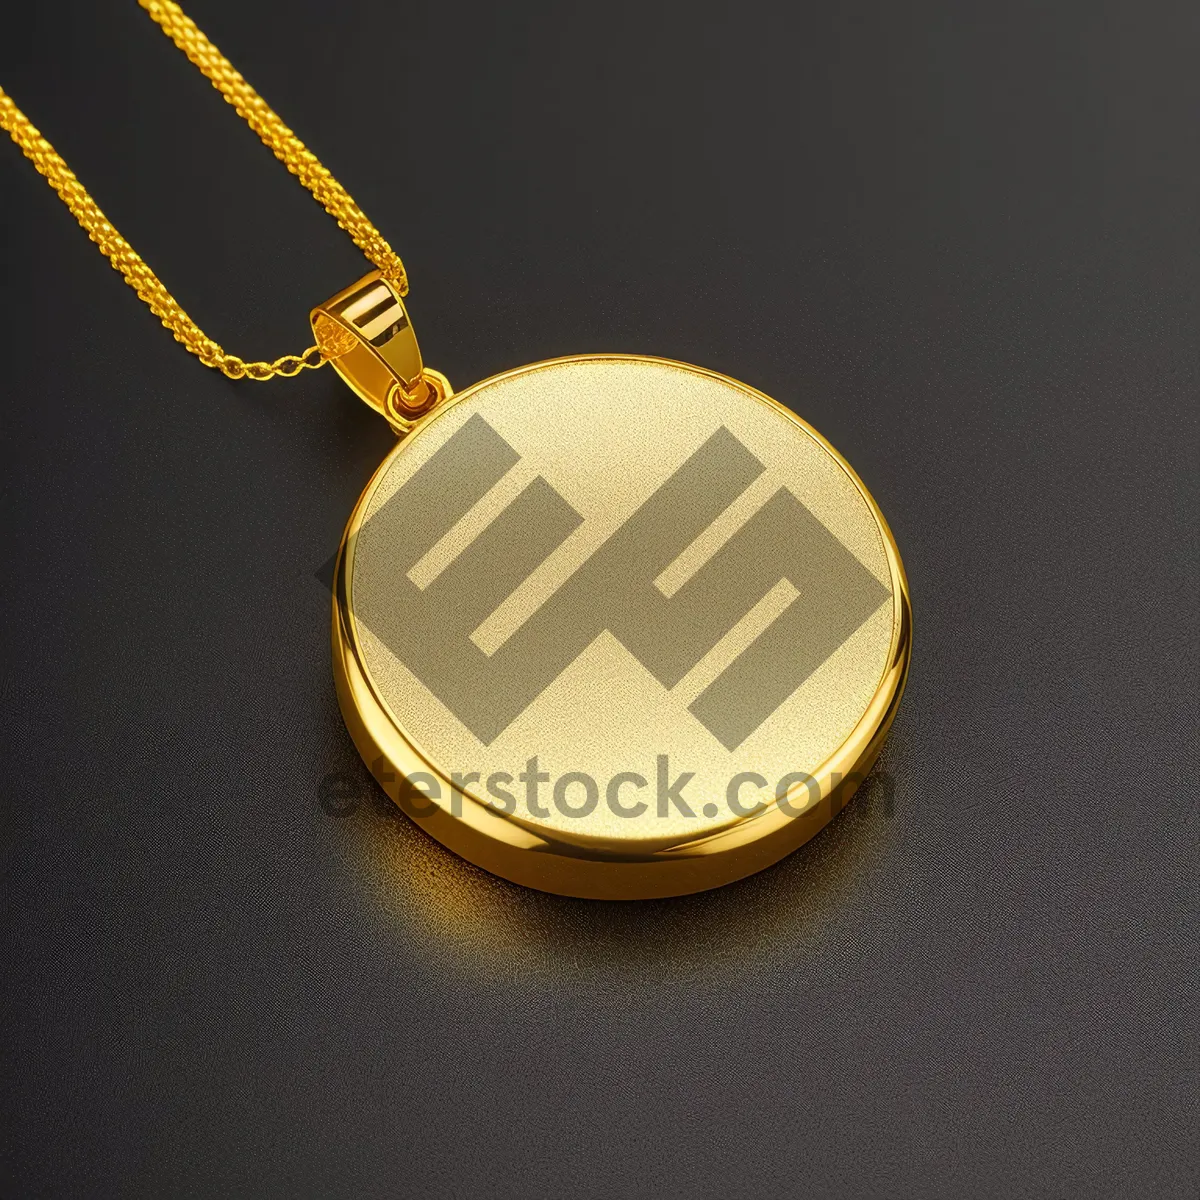 Picture of Sparkling Gold Necklace for Fashionable Accessorizing